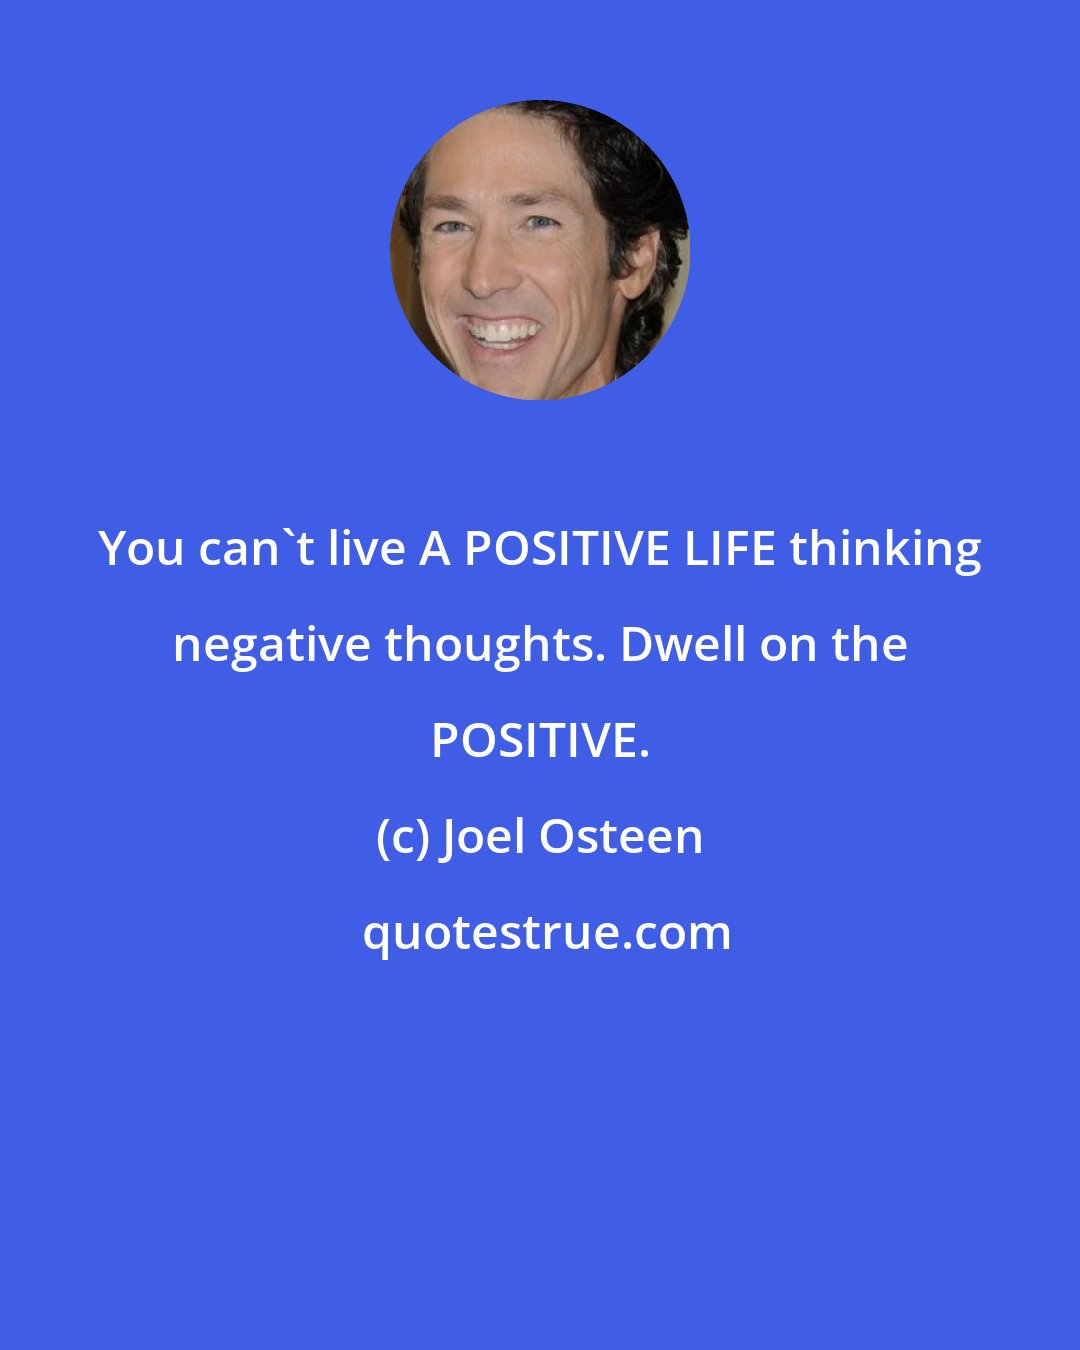 Joel Osteen: You can't live A POSITIVE LIFE thinking negative thoughts. Dwell on the POSITIVE.